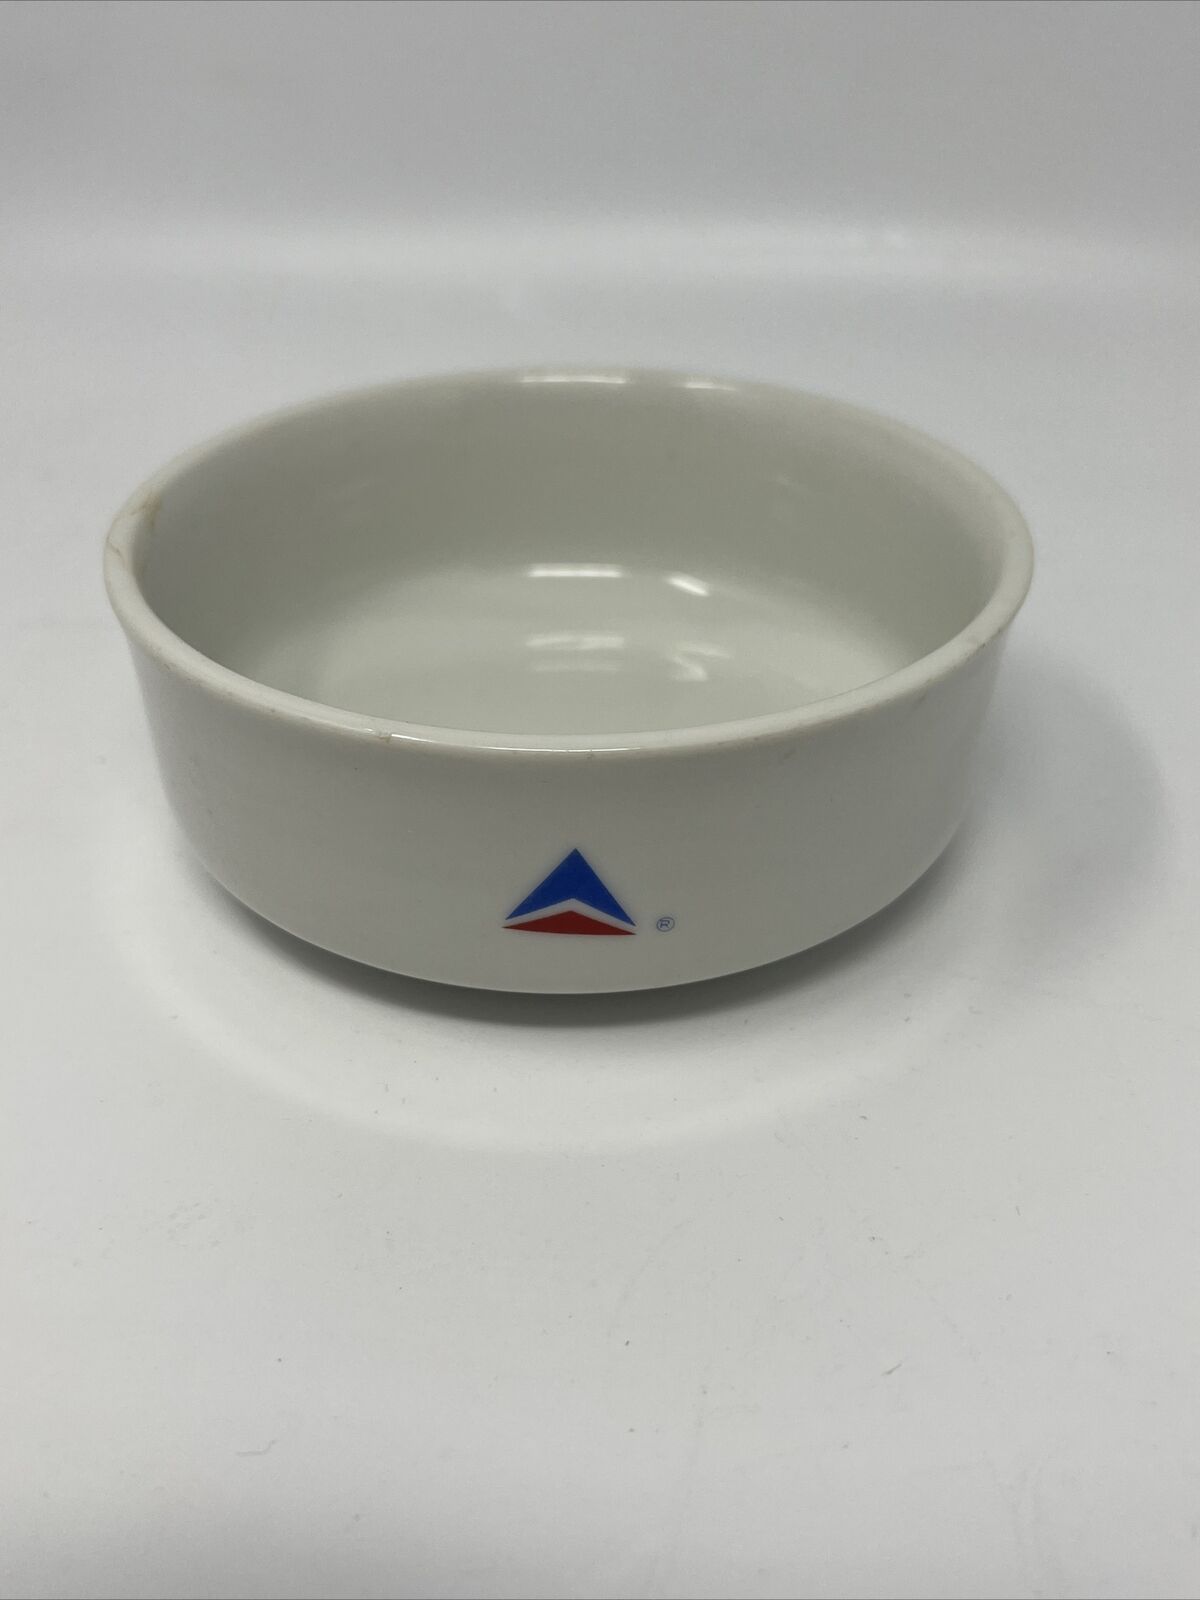 Vintage Rare Holy Grail Misprinted Delta Airline First Class Bowl Made In Japan